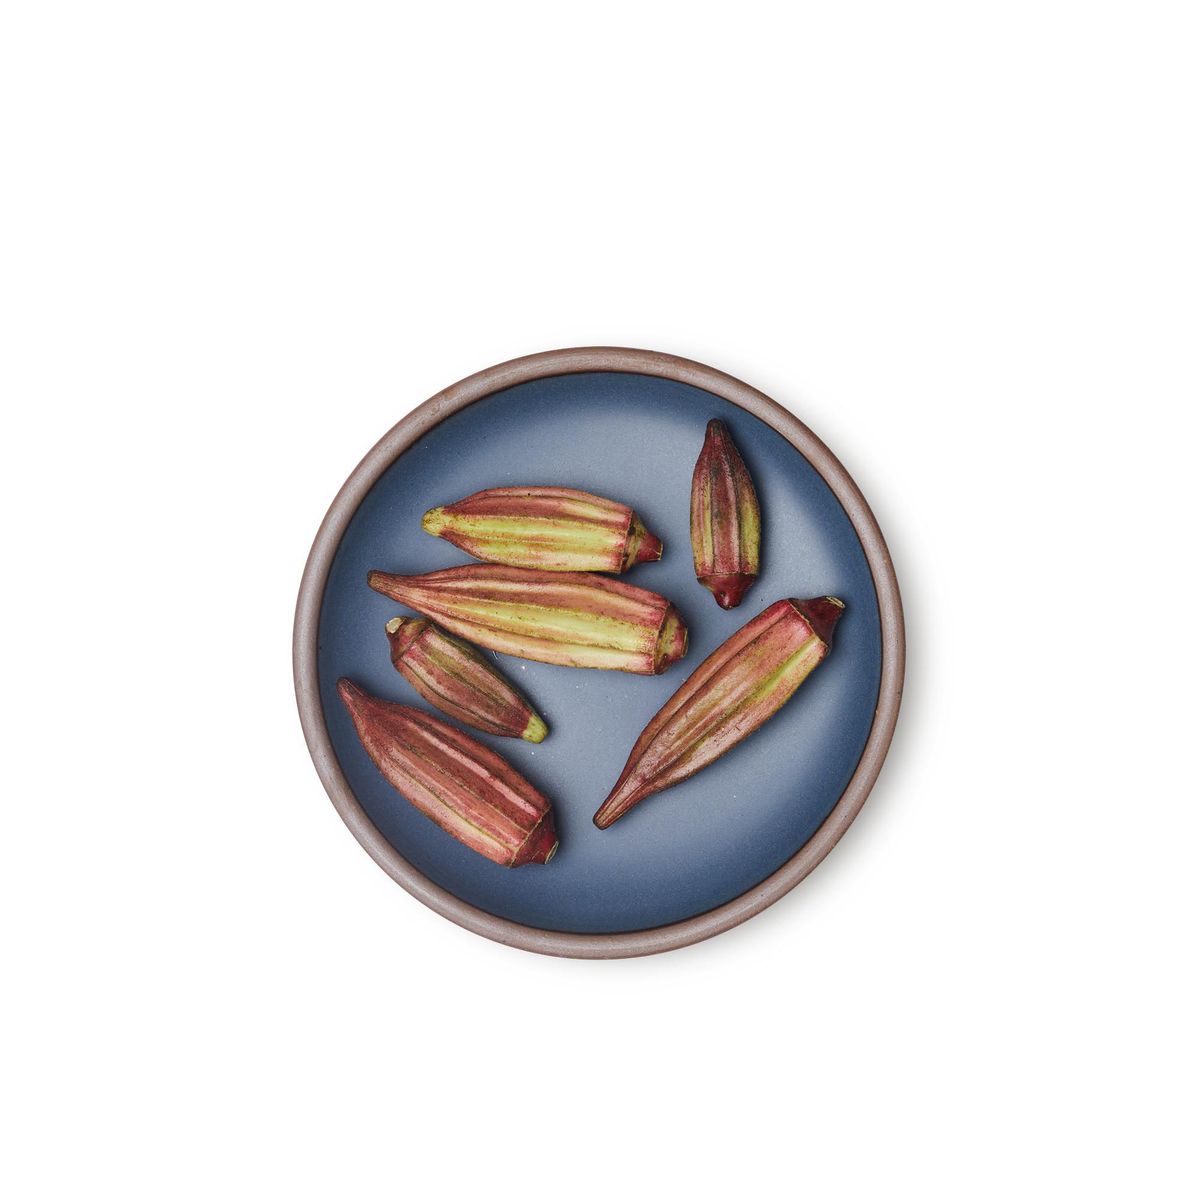 Okra on a medium sized ceramic plate in a toned-down navy color featuring iron speckles and an unglazed rim.